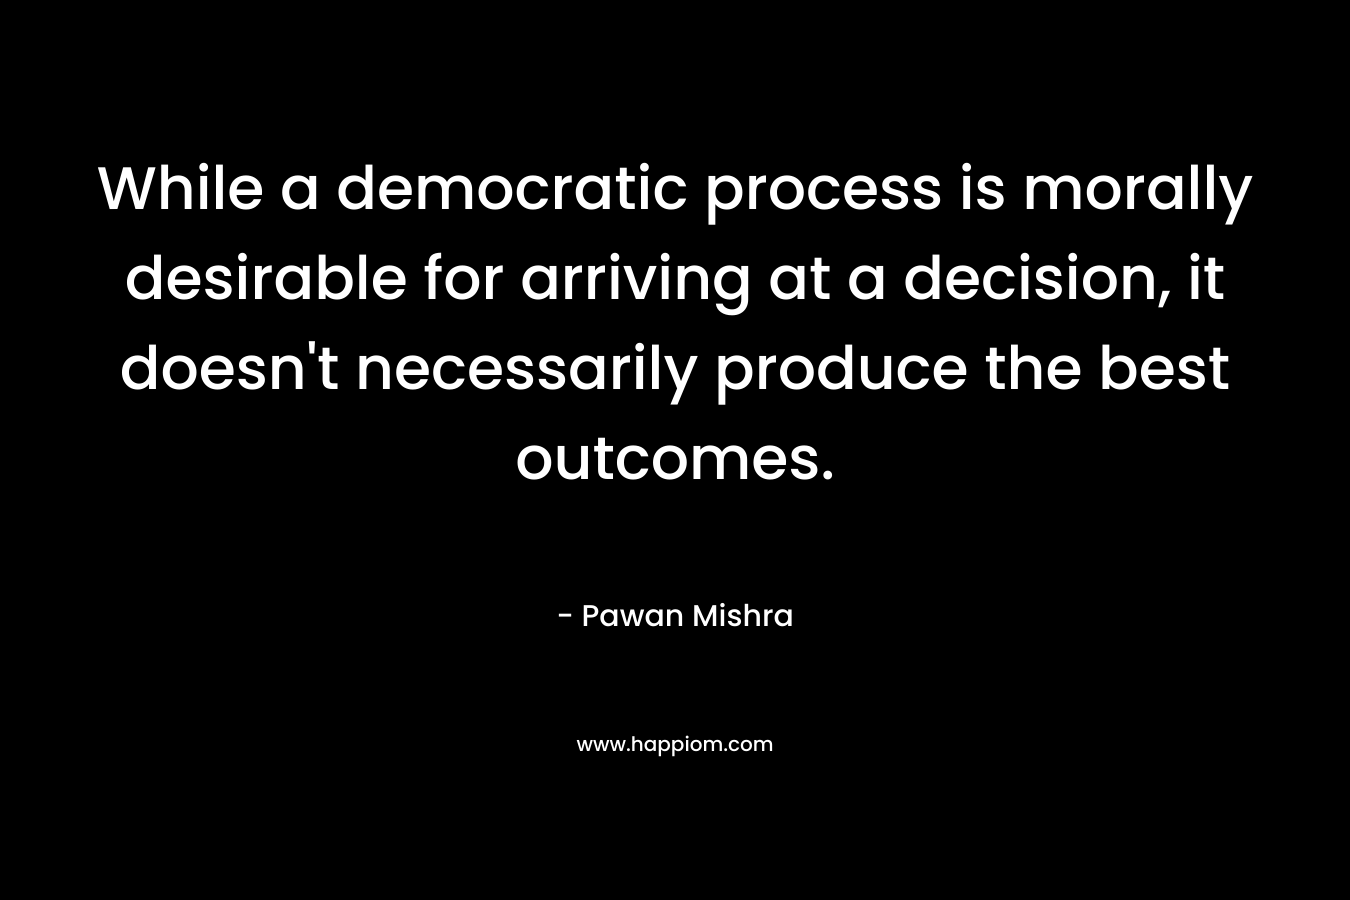 While a democratic process is morally desirable for arriving at a decision, it doesn't necessarily produce the best outcomes.